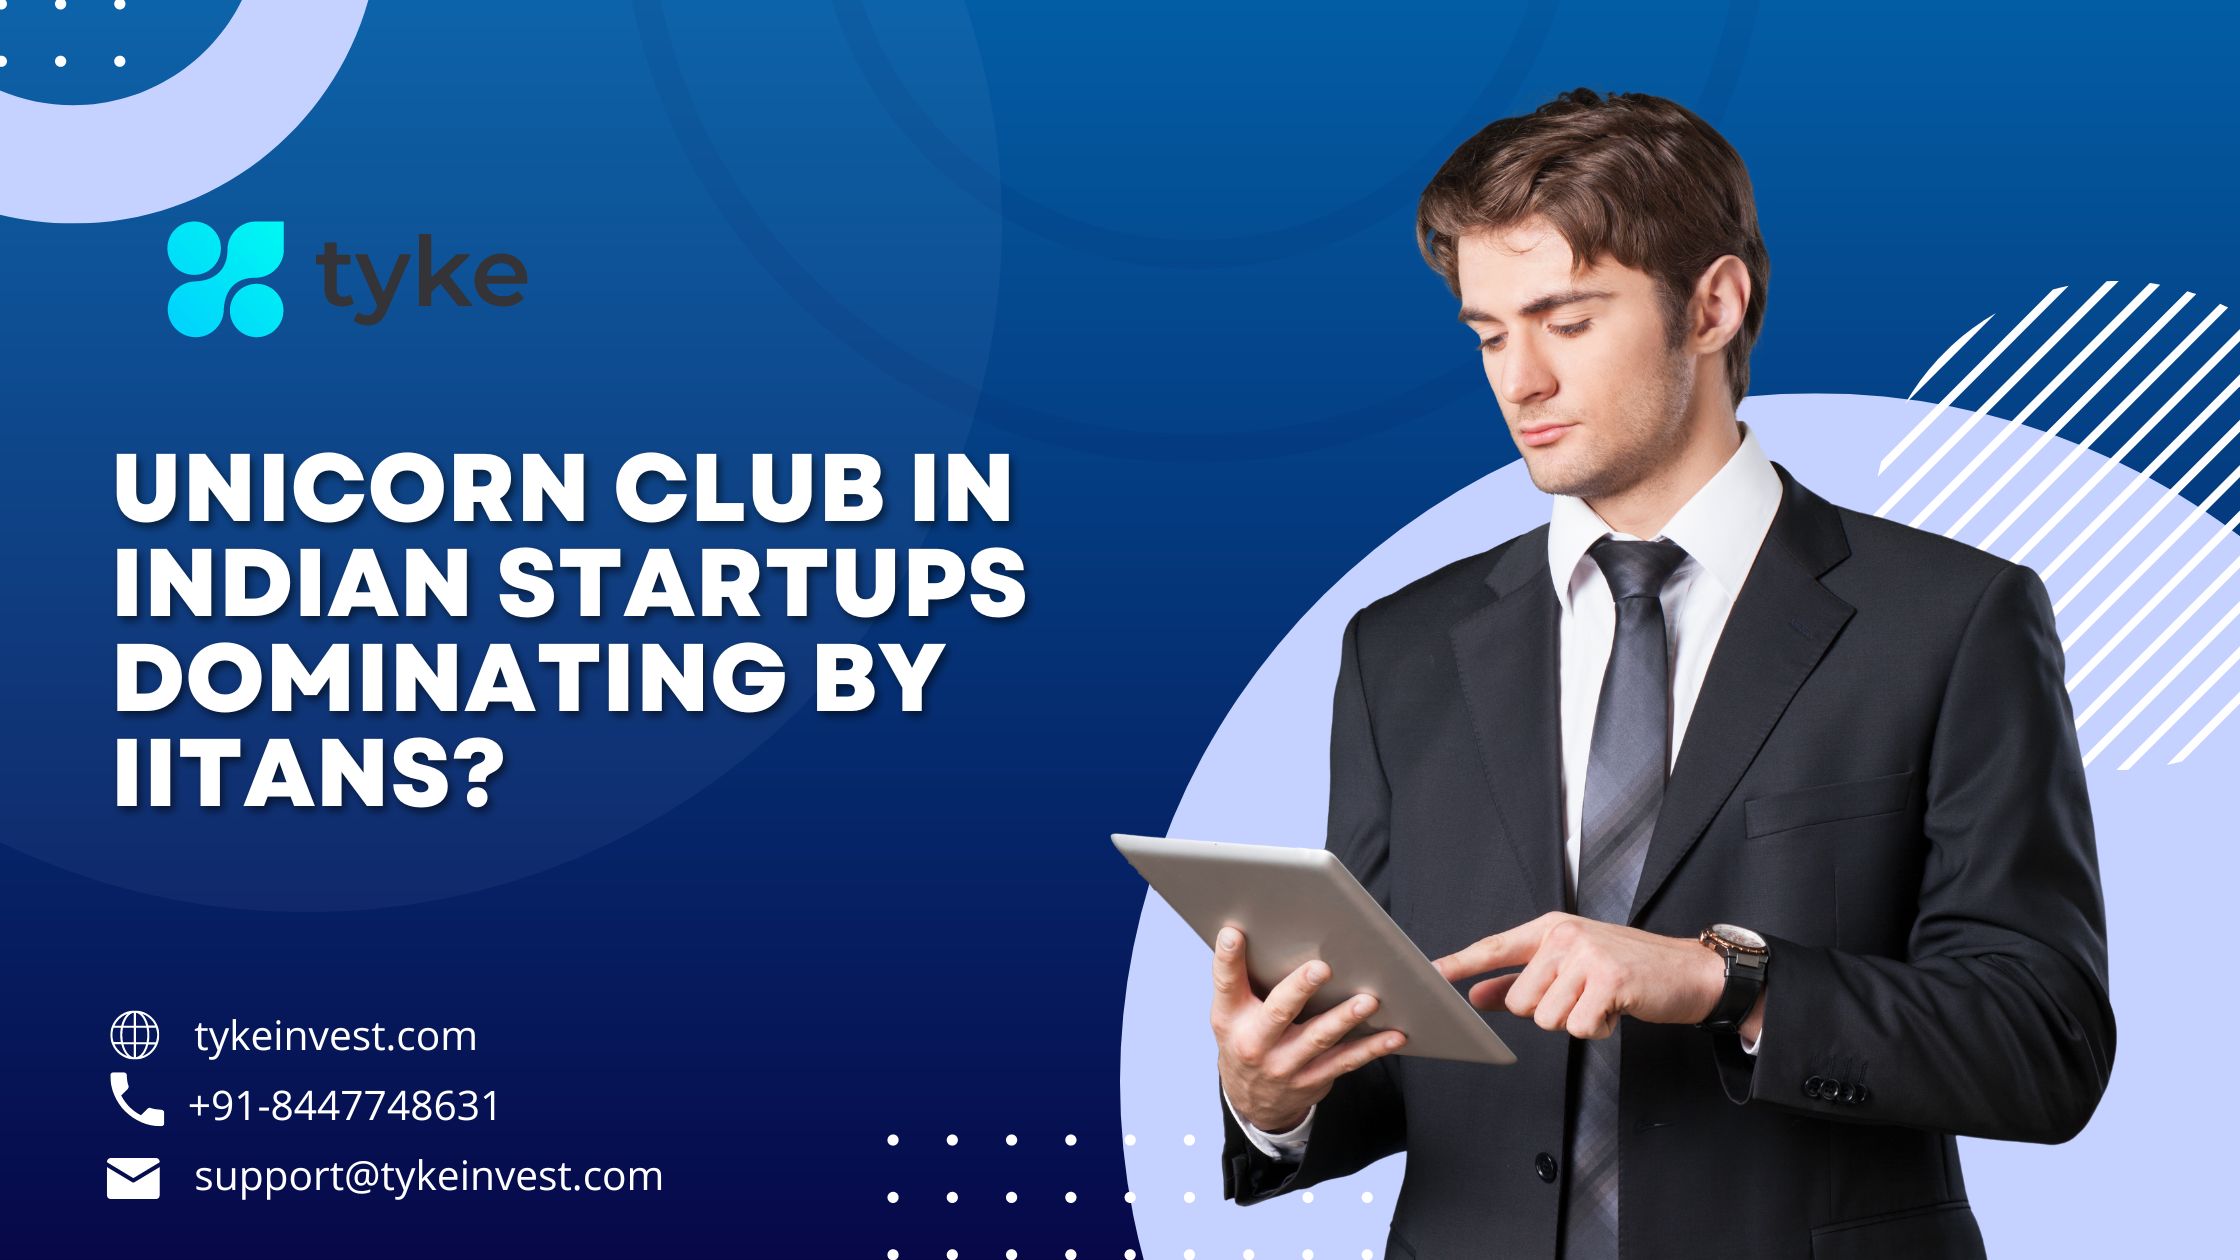 Is it true unicorn club in Indian startups dominating by IITans